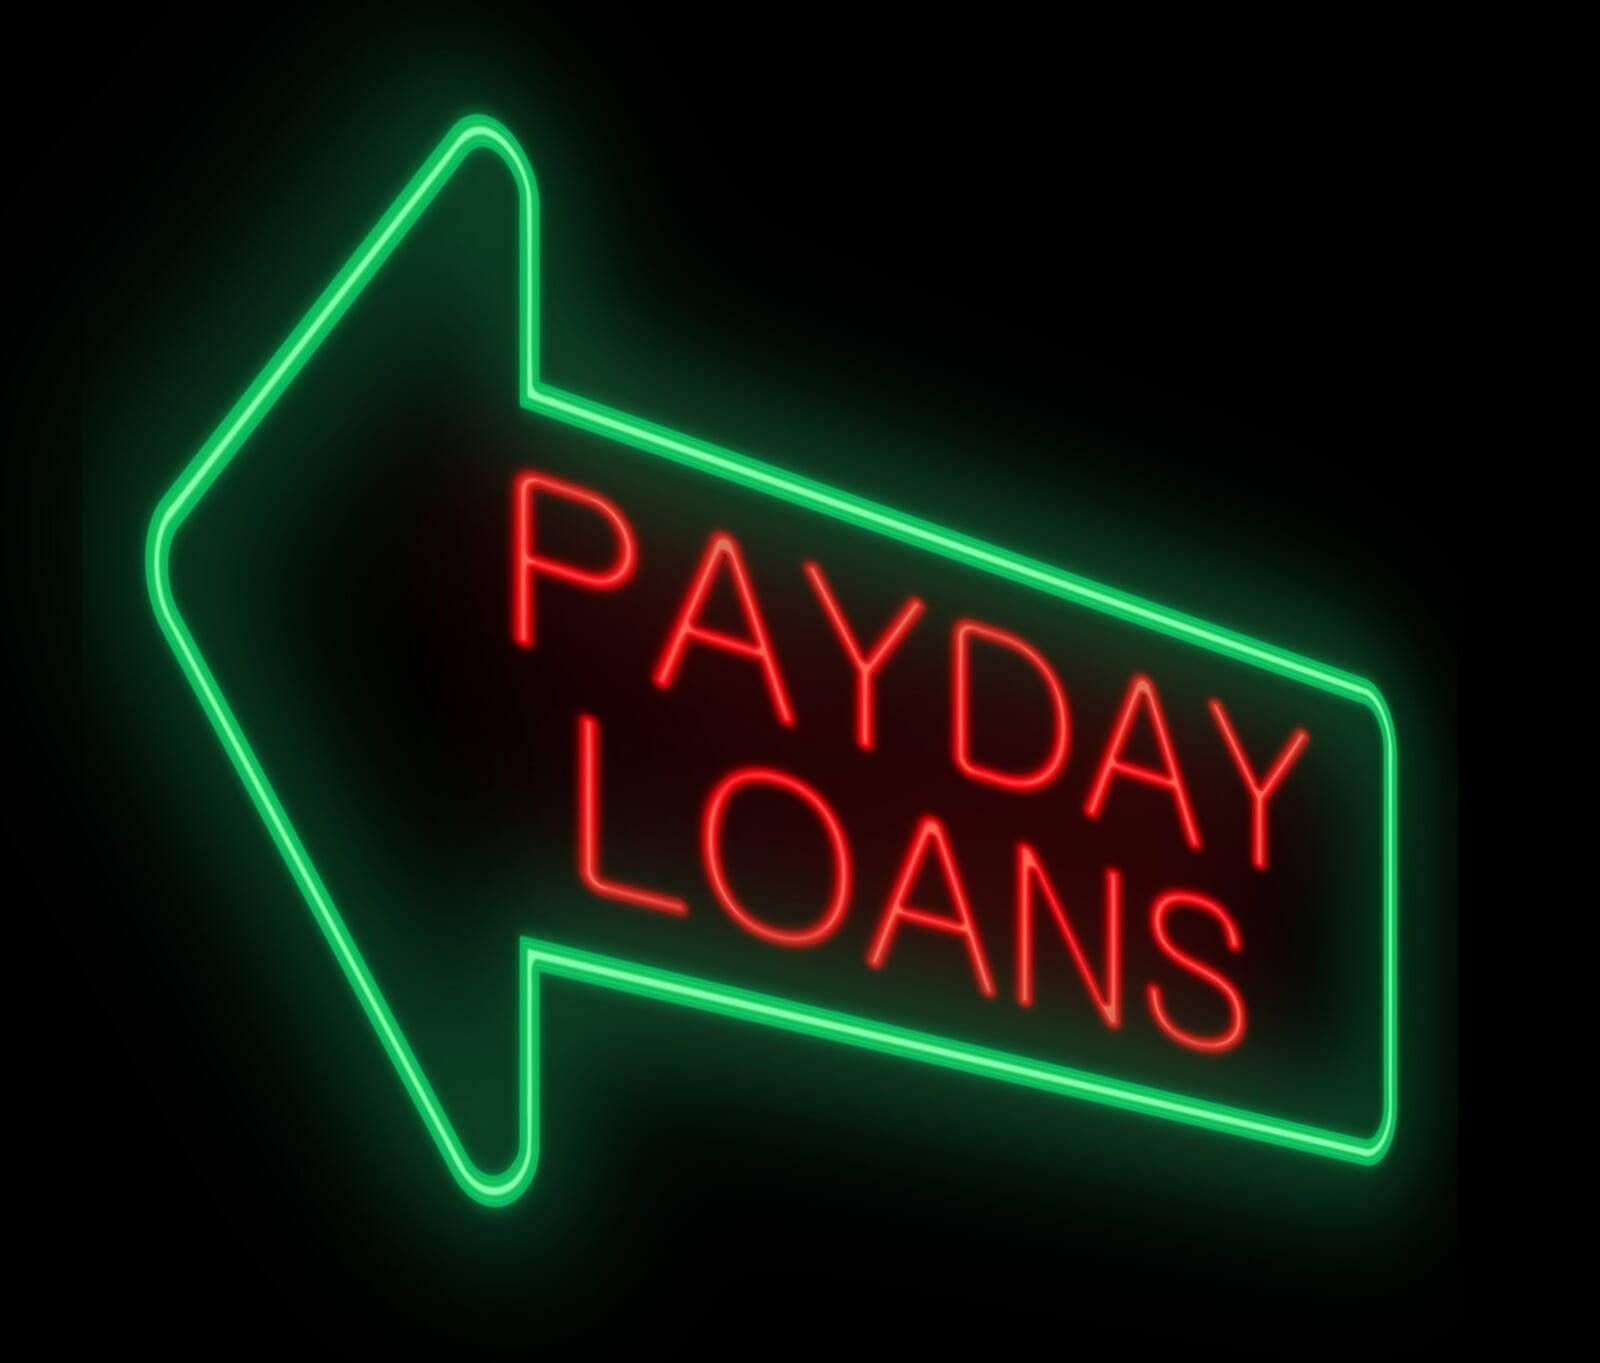 Bill Would Require Payday Lending Practices Reporting